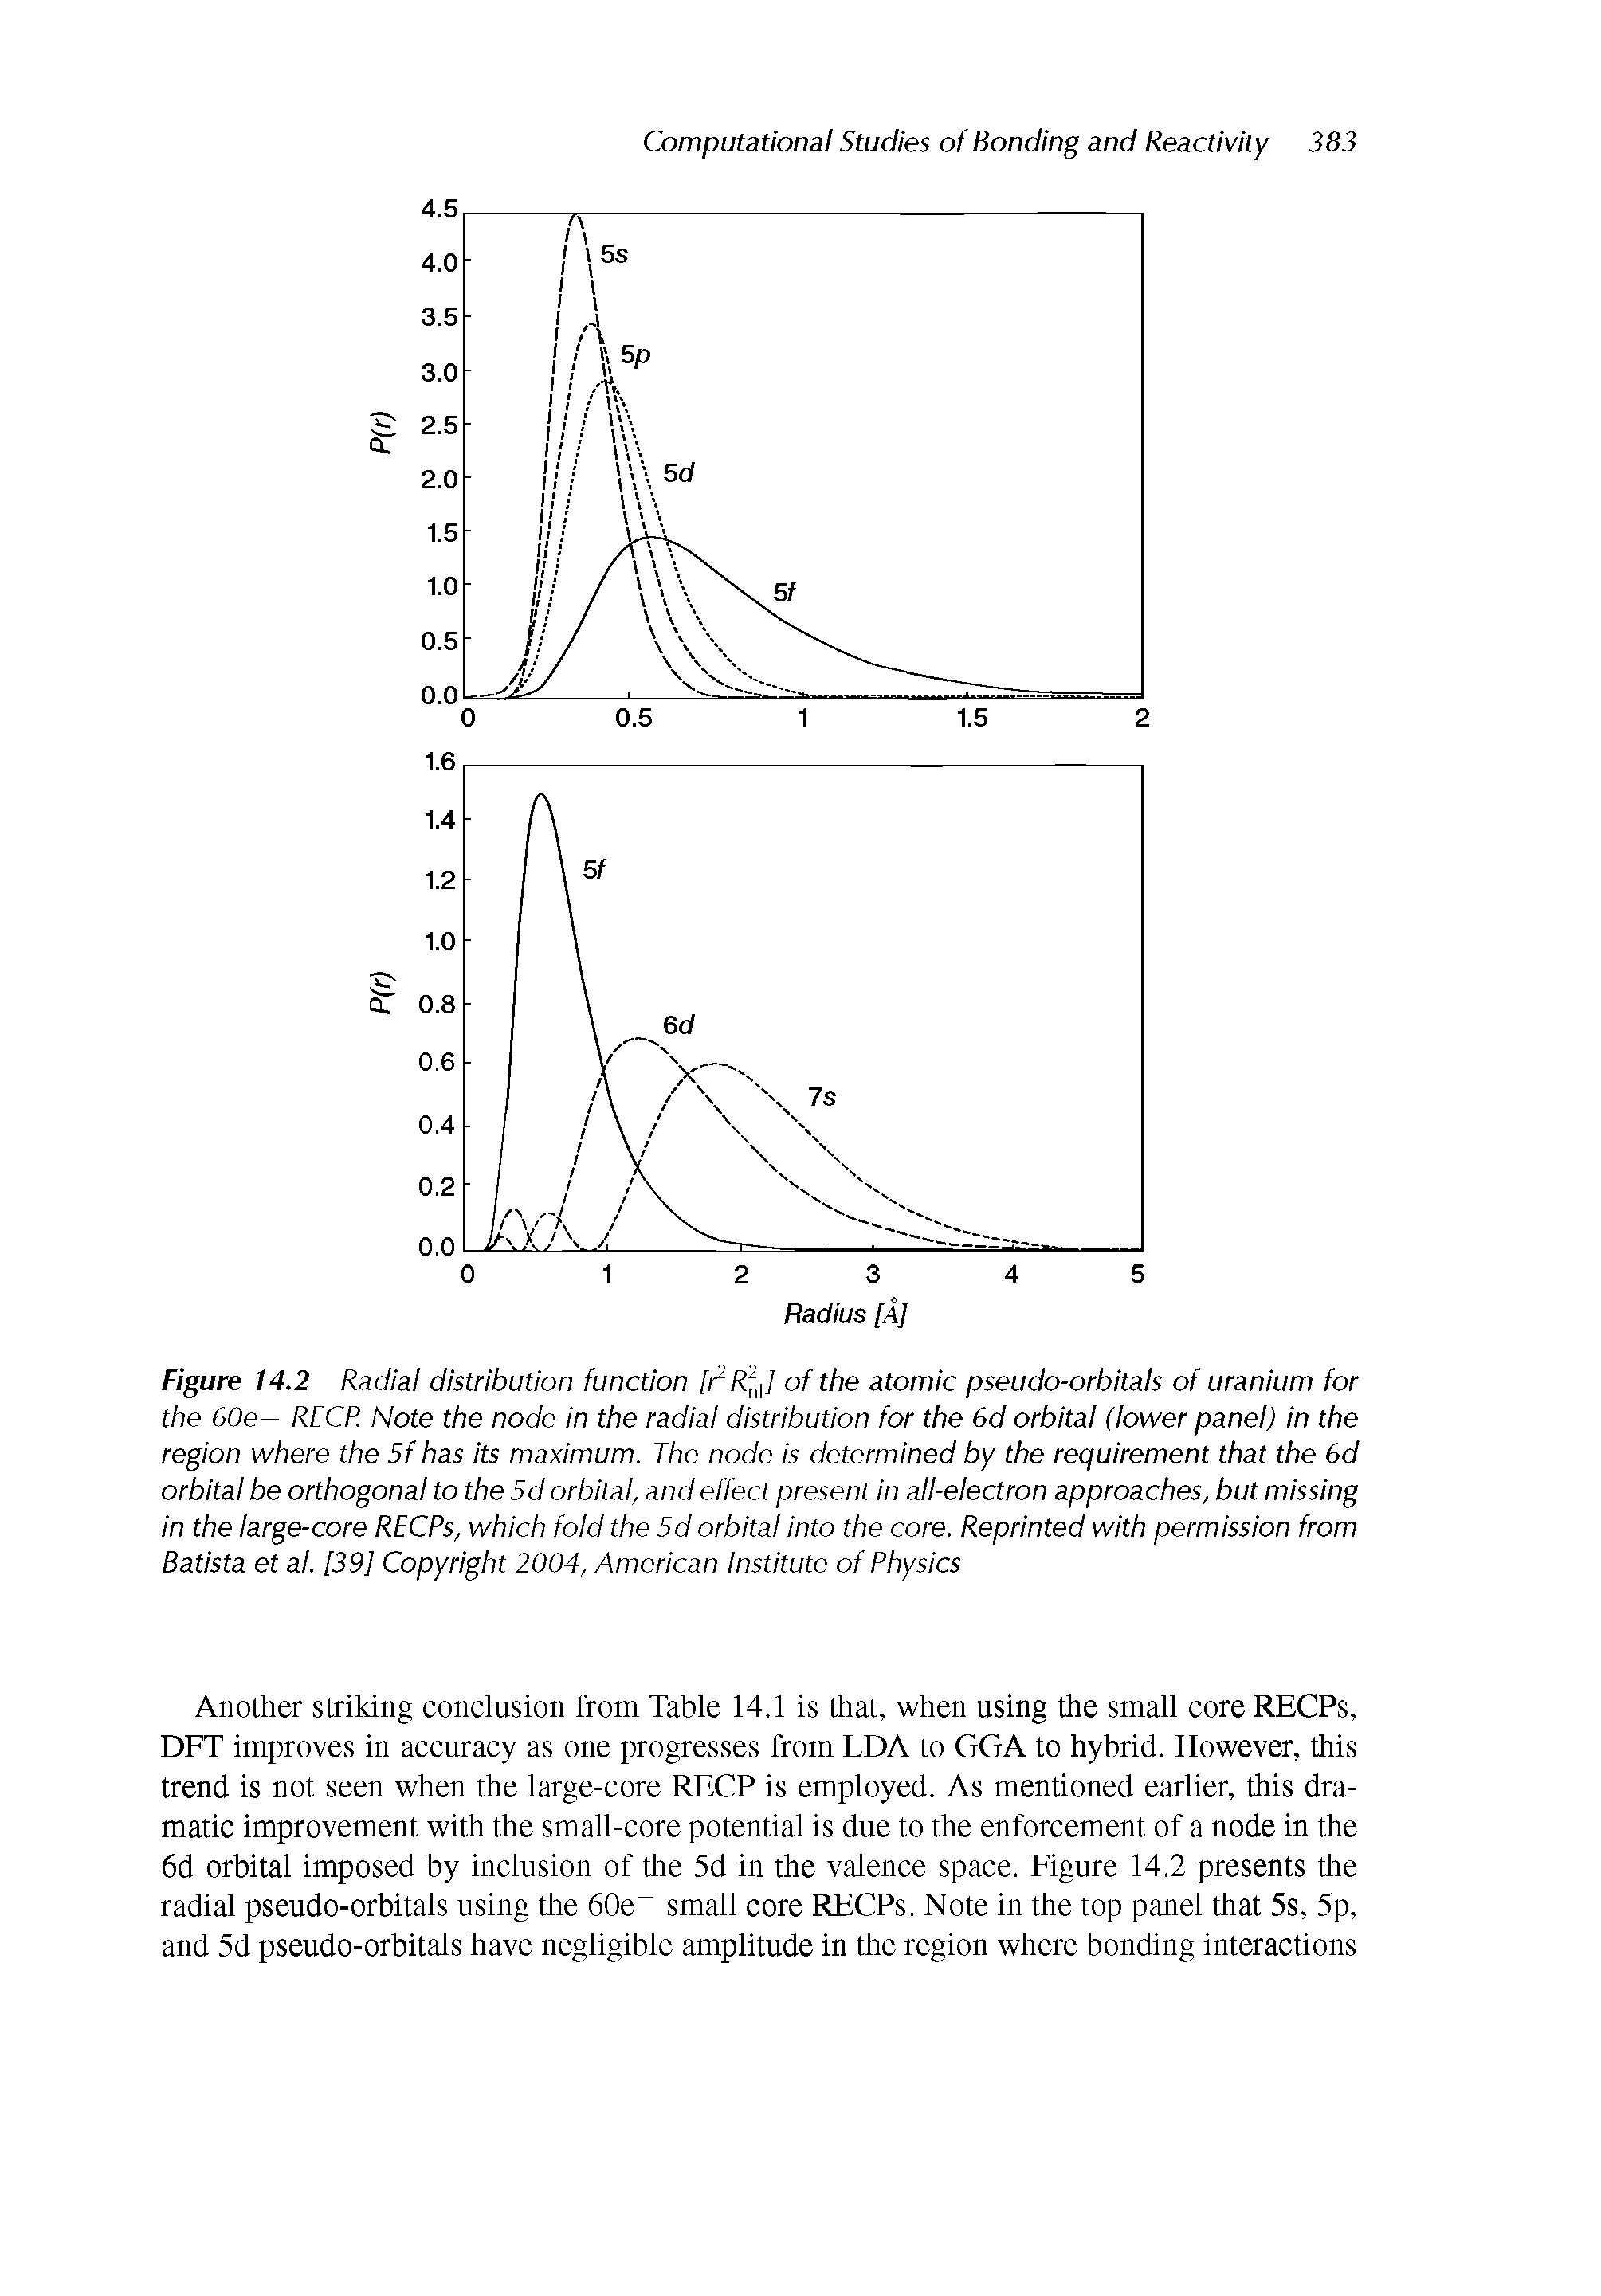 Figure 14.2 Radial distribution function [r R J of the atomic pseudo-orbitals of uranium for the 60e— RECR Note the node in the radial distribution for the 6d orbital (lower panel) in the region where the 5f has its maximum. The node is determined by the requirement that the 6d orbital be orthogonal to the 5d orbital, and effect present In all-electron approaches, but missing in the large-core RECPs, which fold the 5d orbital Into the core. Reprinted with permission from Batista et al. [39] Copyright 2004, American Institute of Physics...